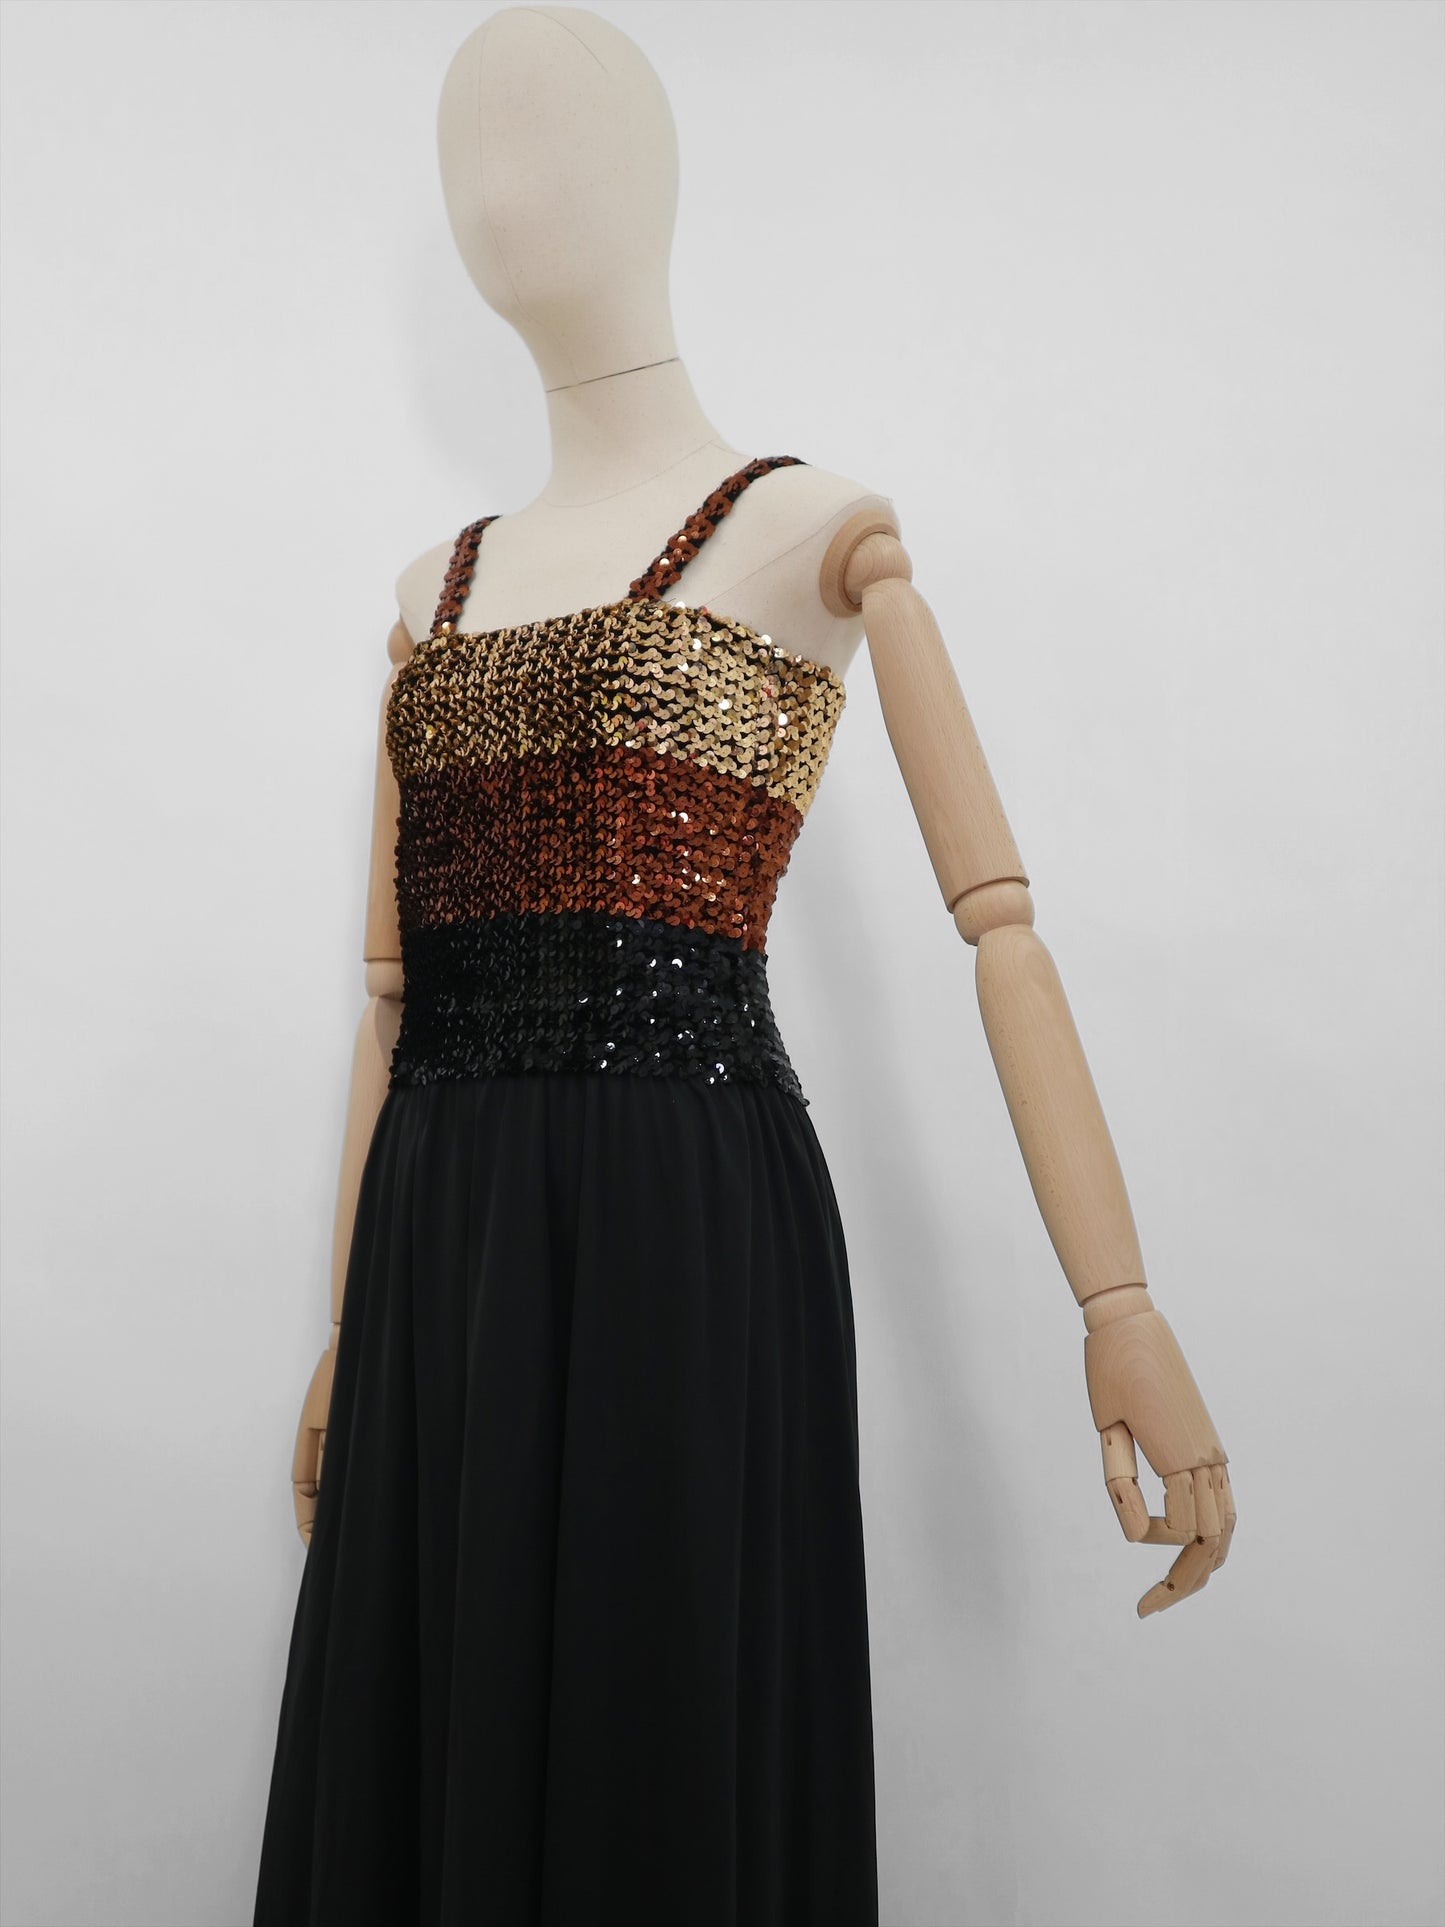 70’s Sequence Vintage Dress by Richard Shops